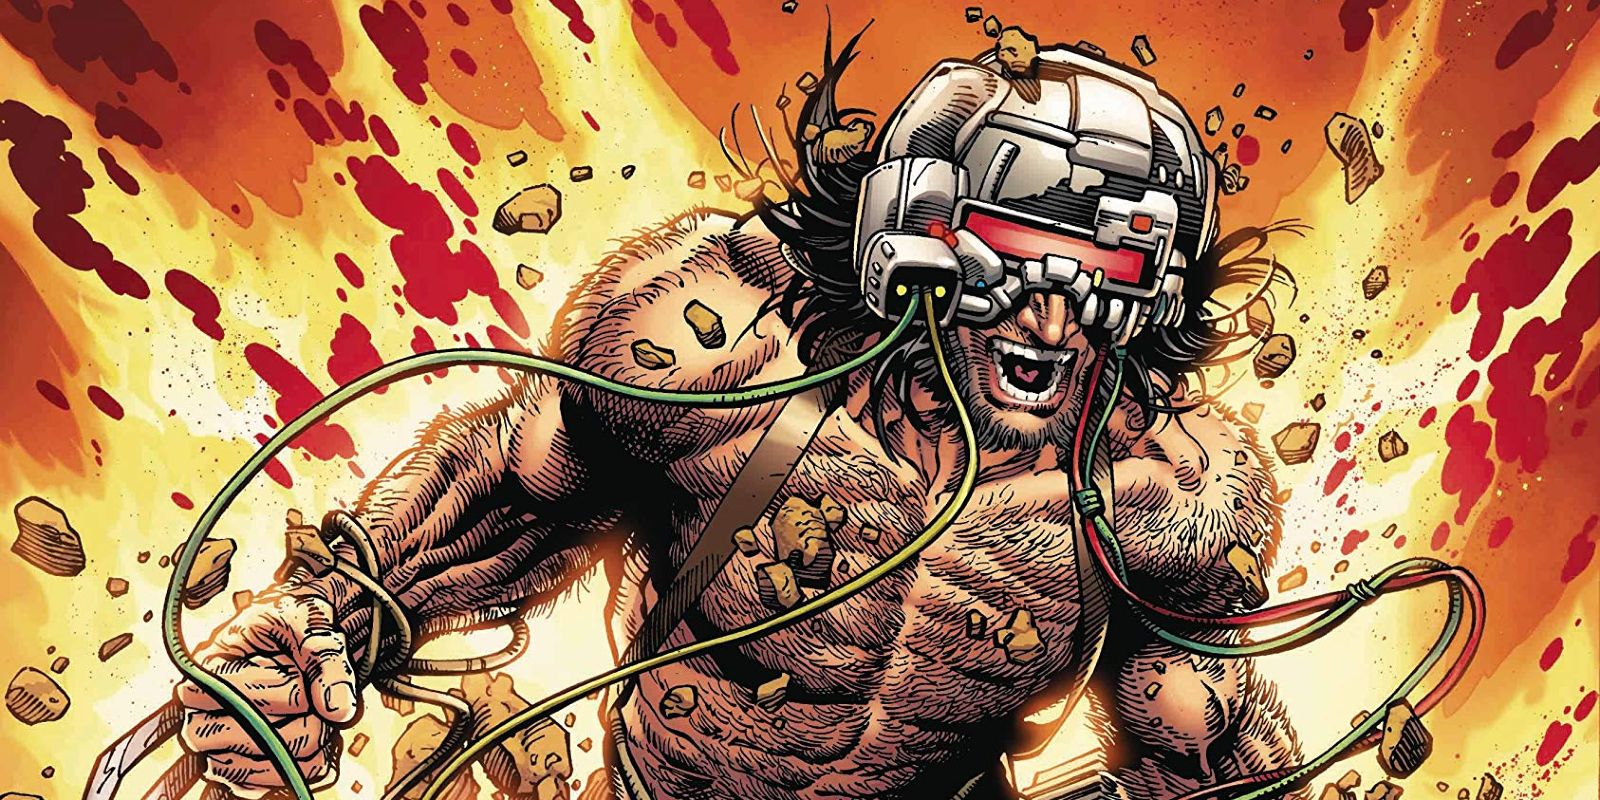 Wolverine breaking out of the Weapon X program in X-Men comics